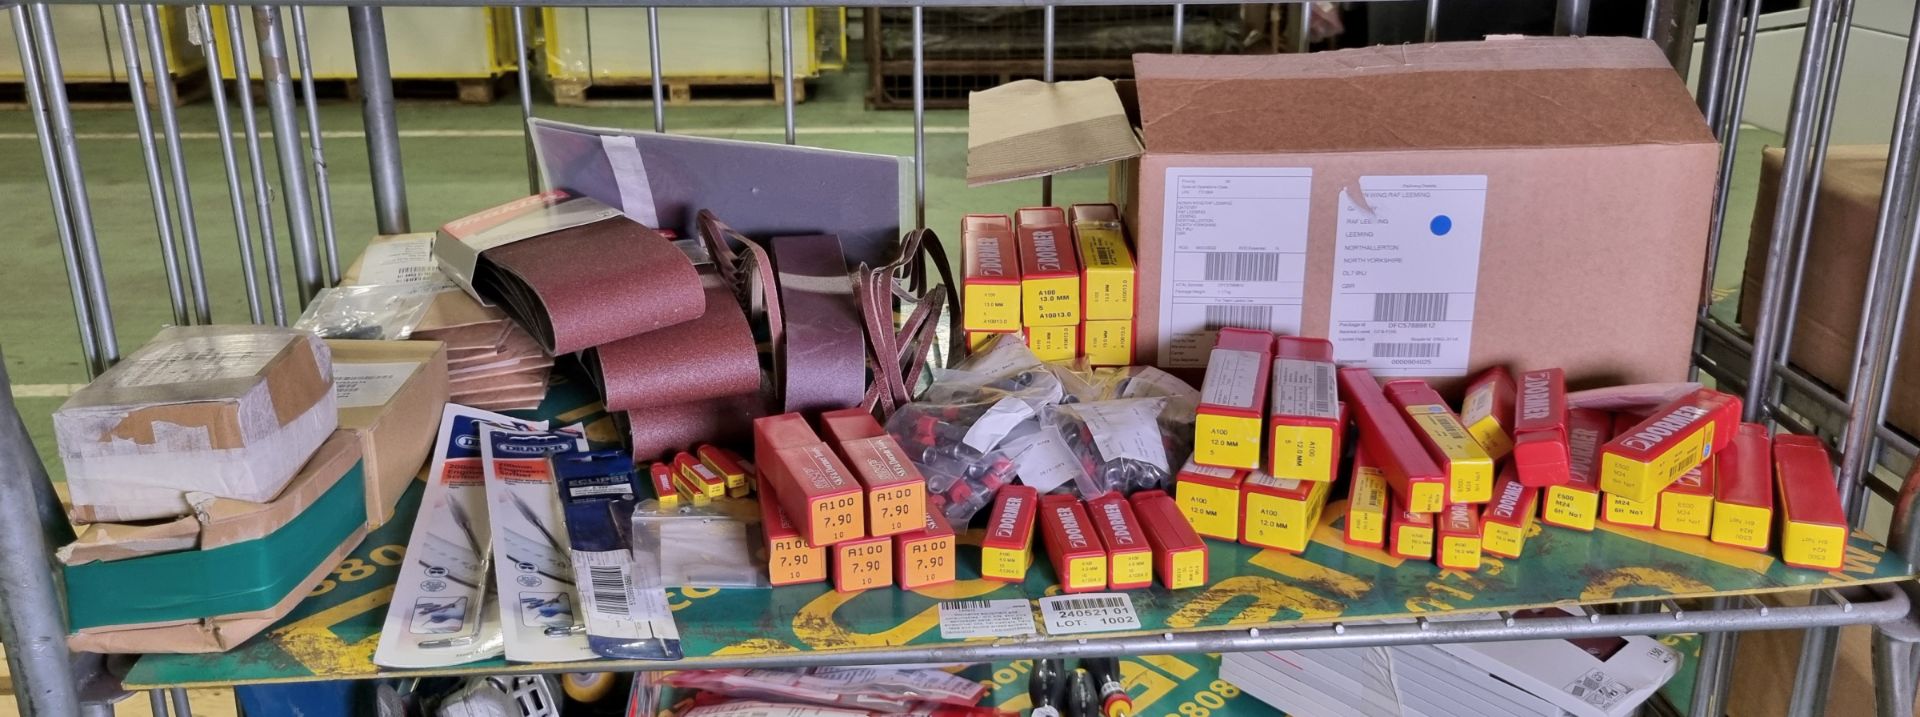 Workshop equipment and consumables - drill bits, skin pins, sandpaper belts, marker tags,